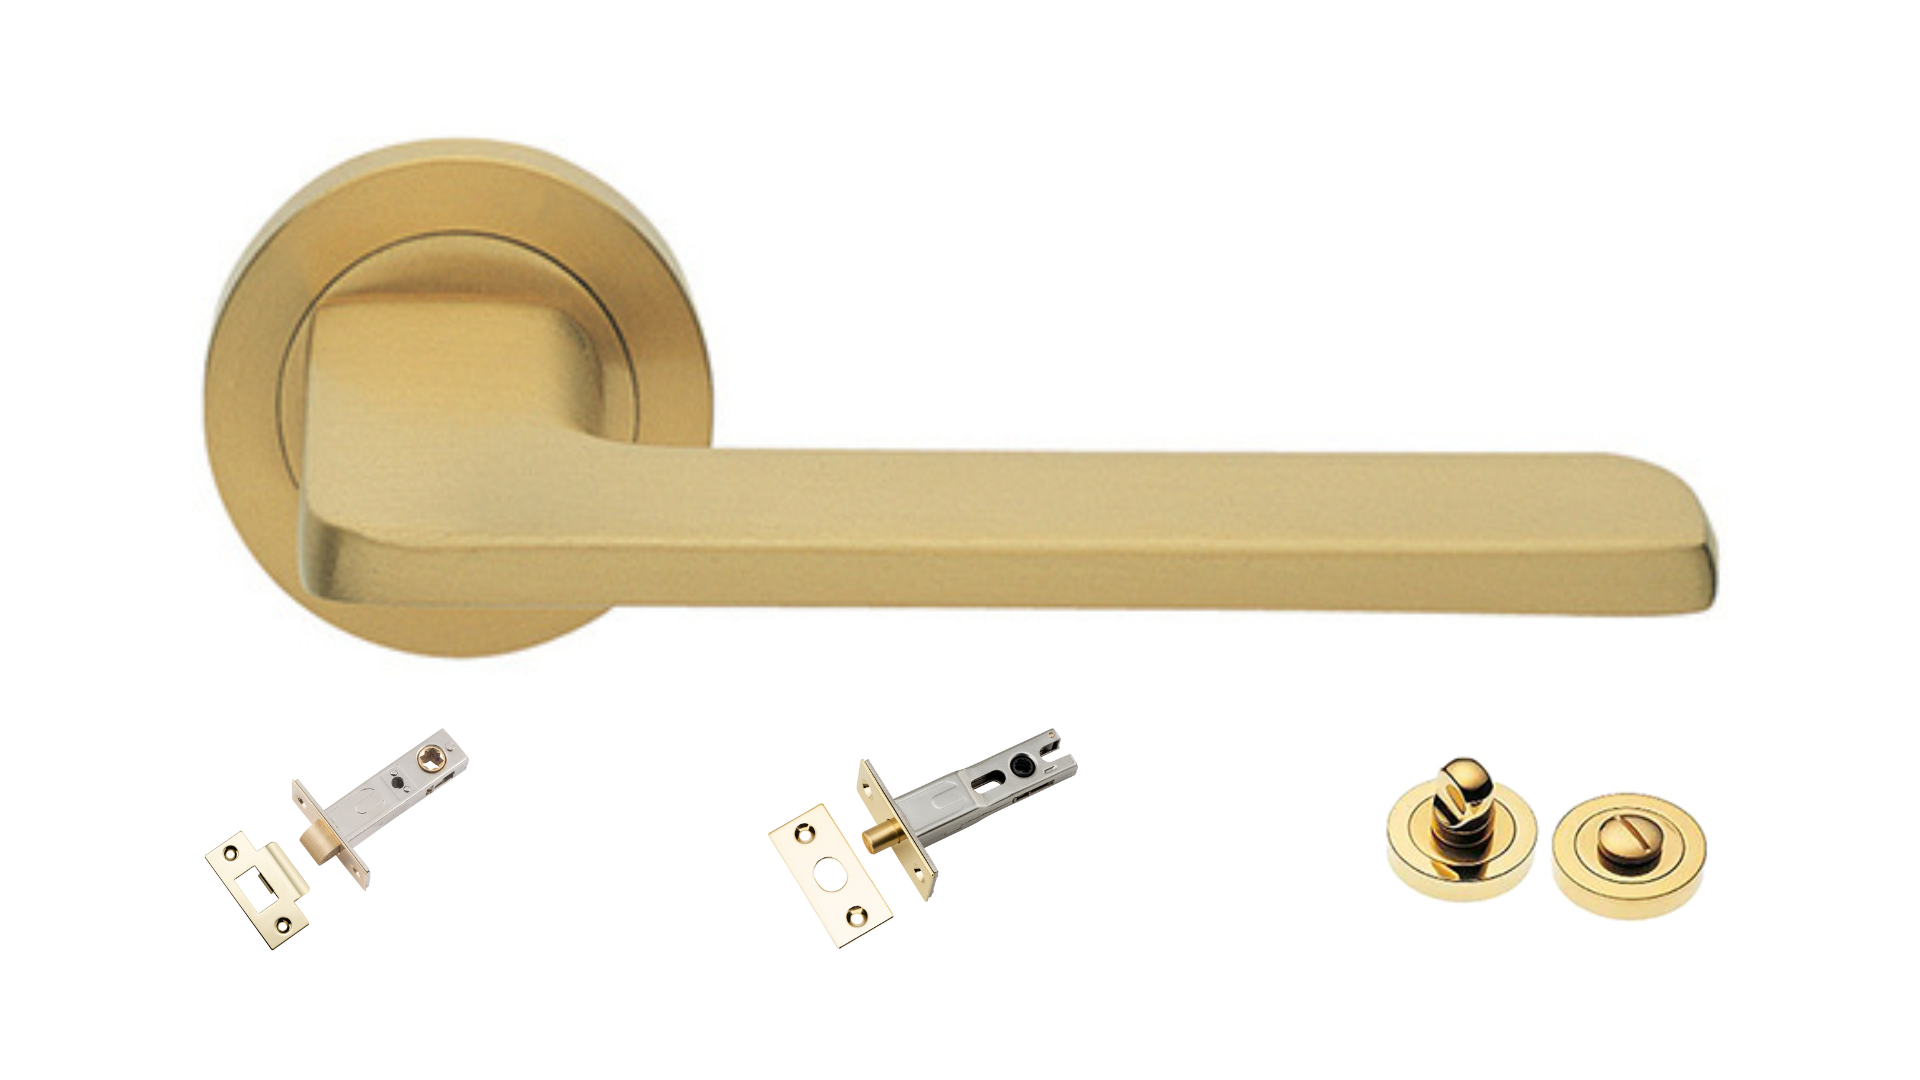 The Blade door handle in satin brass chrome with a tubular latch, privacy bolt and privacy turn kit underneath on a white background.